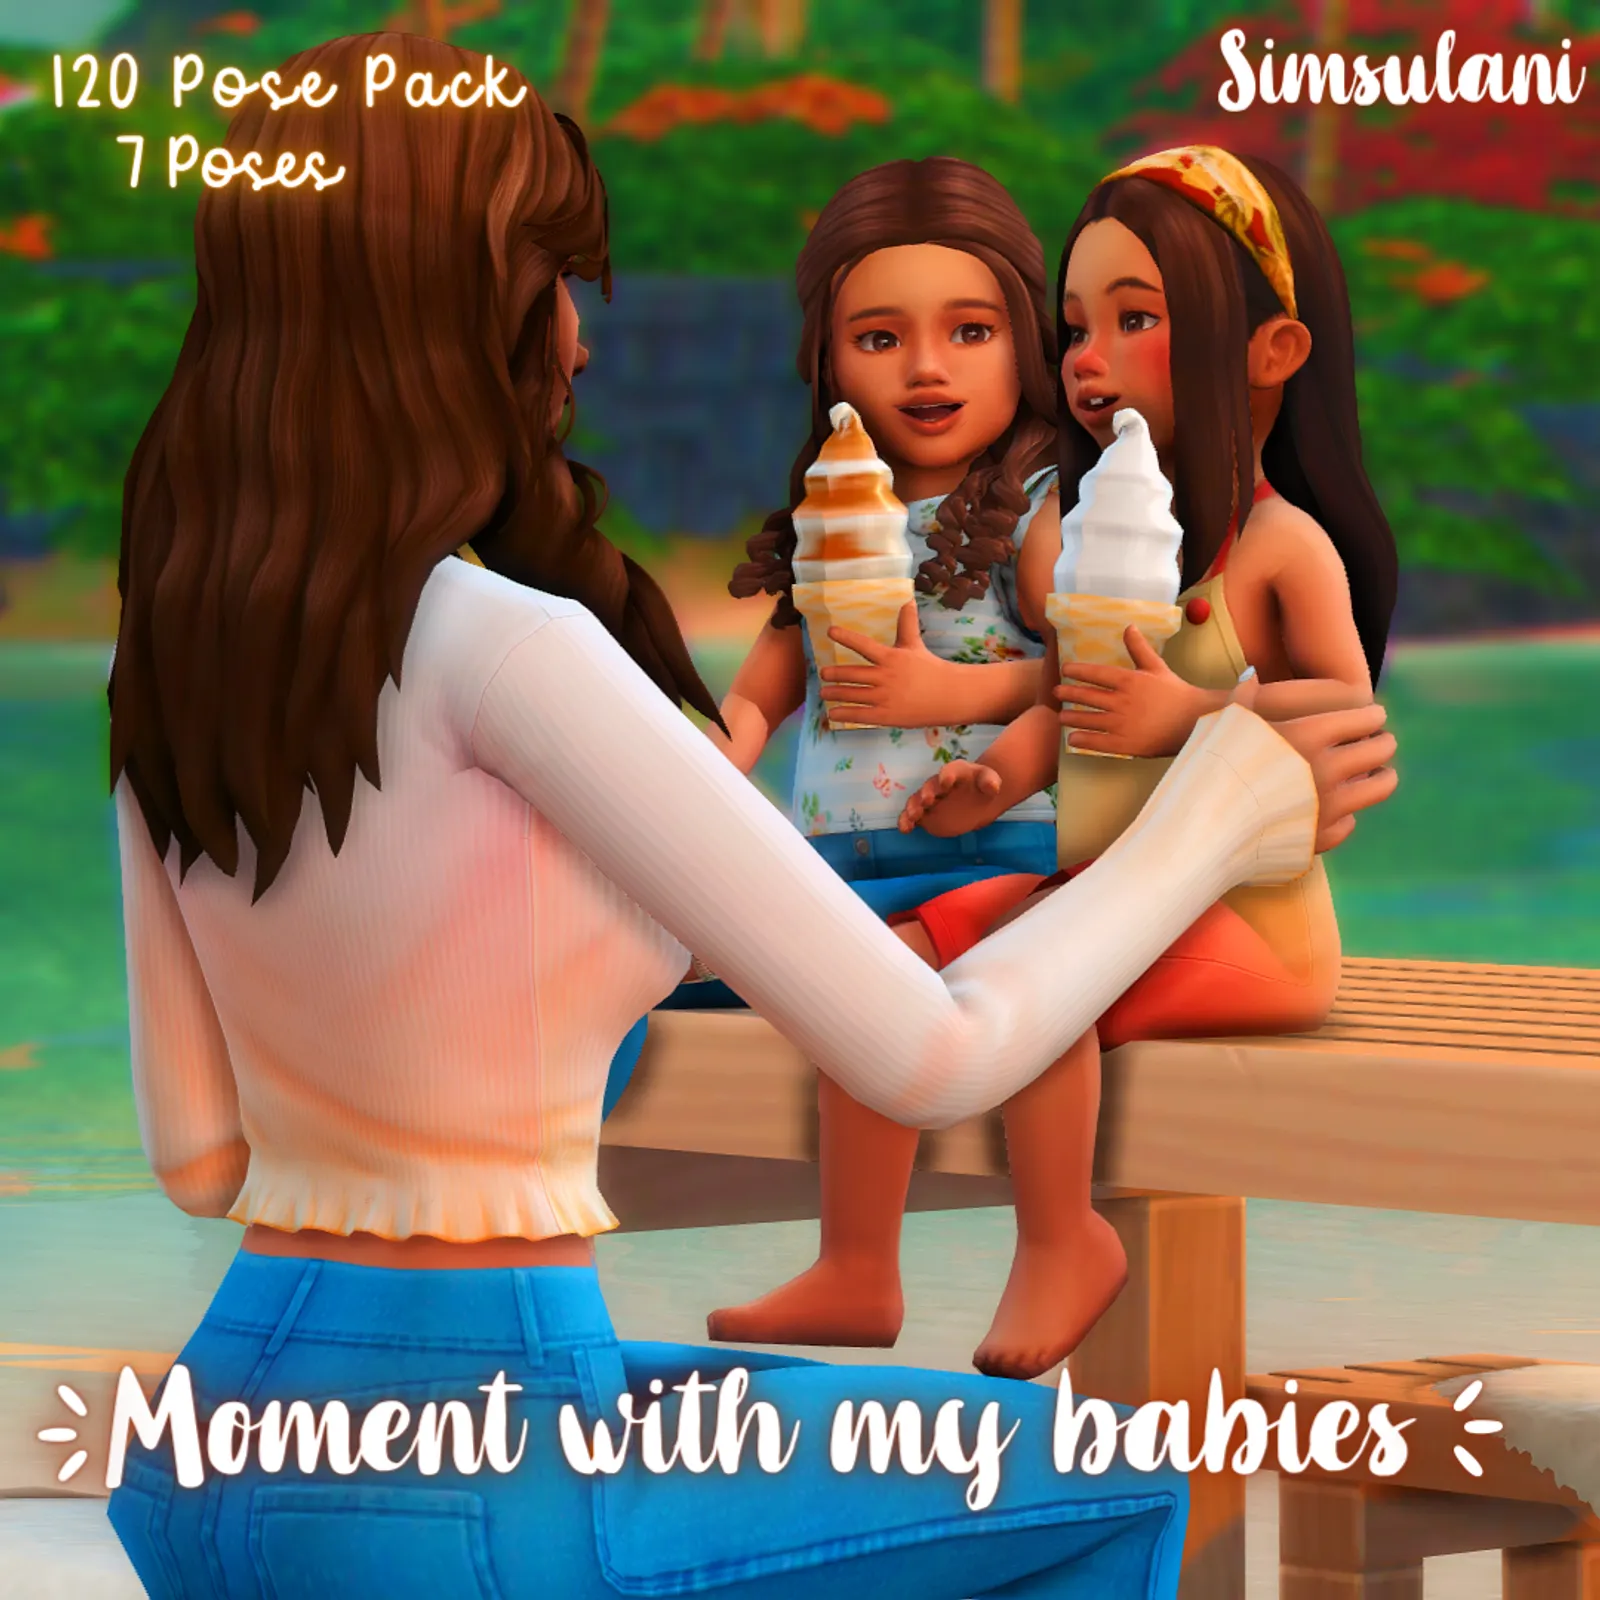 #120 Pose Pack - Moment with my babies